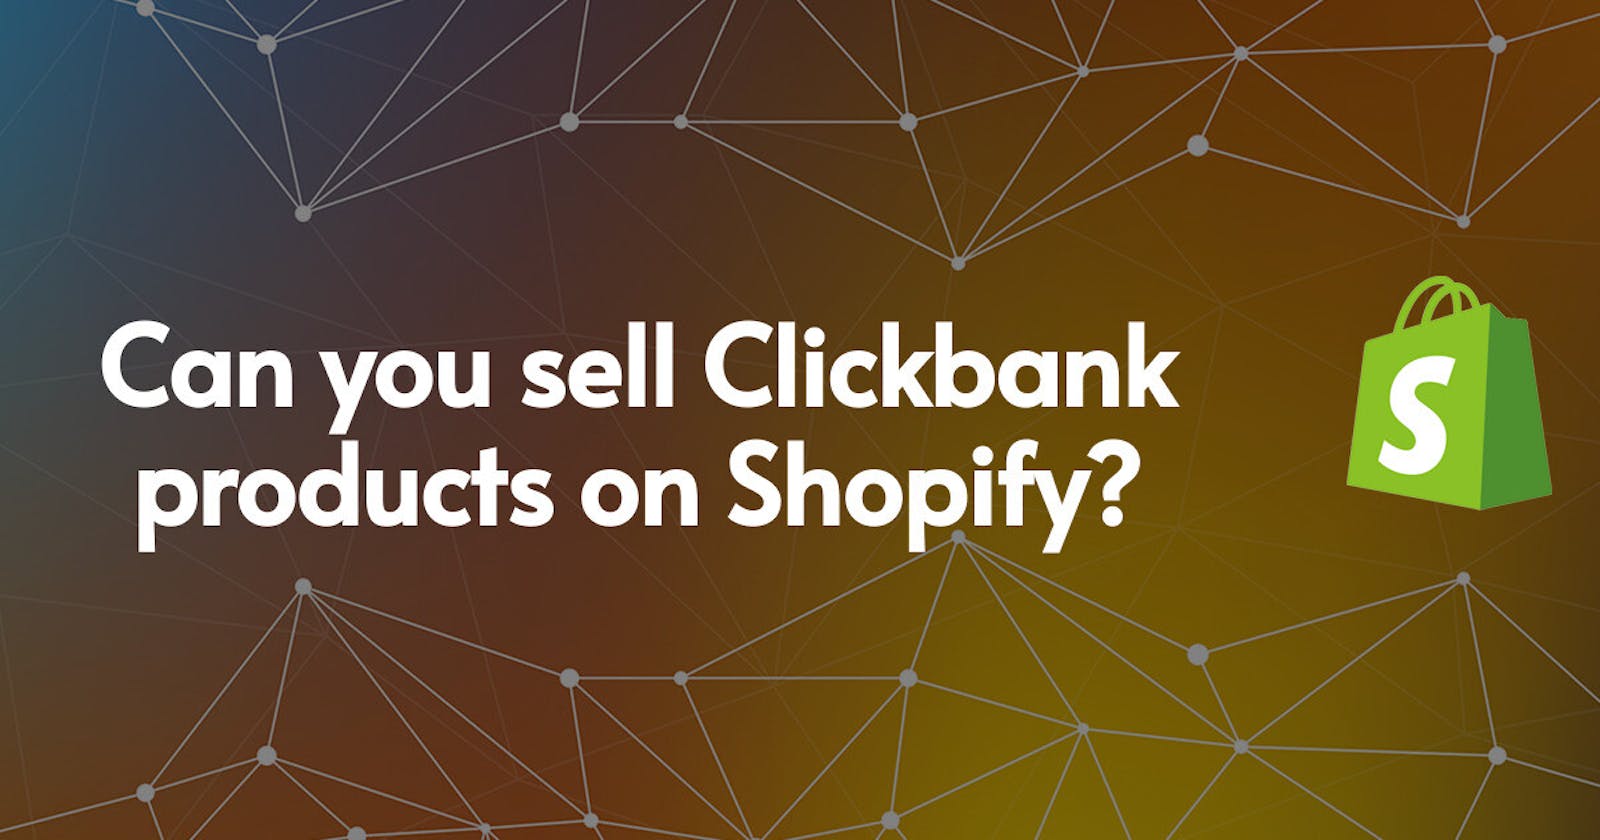 Can you sell Clickbank products on Shopify?